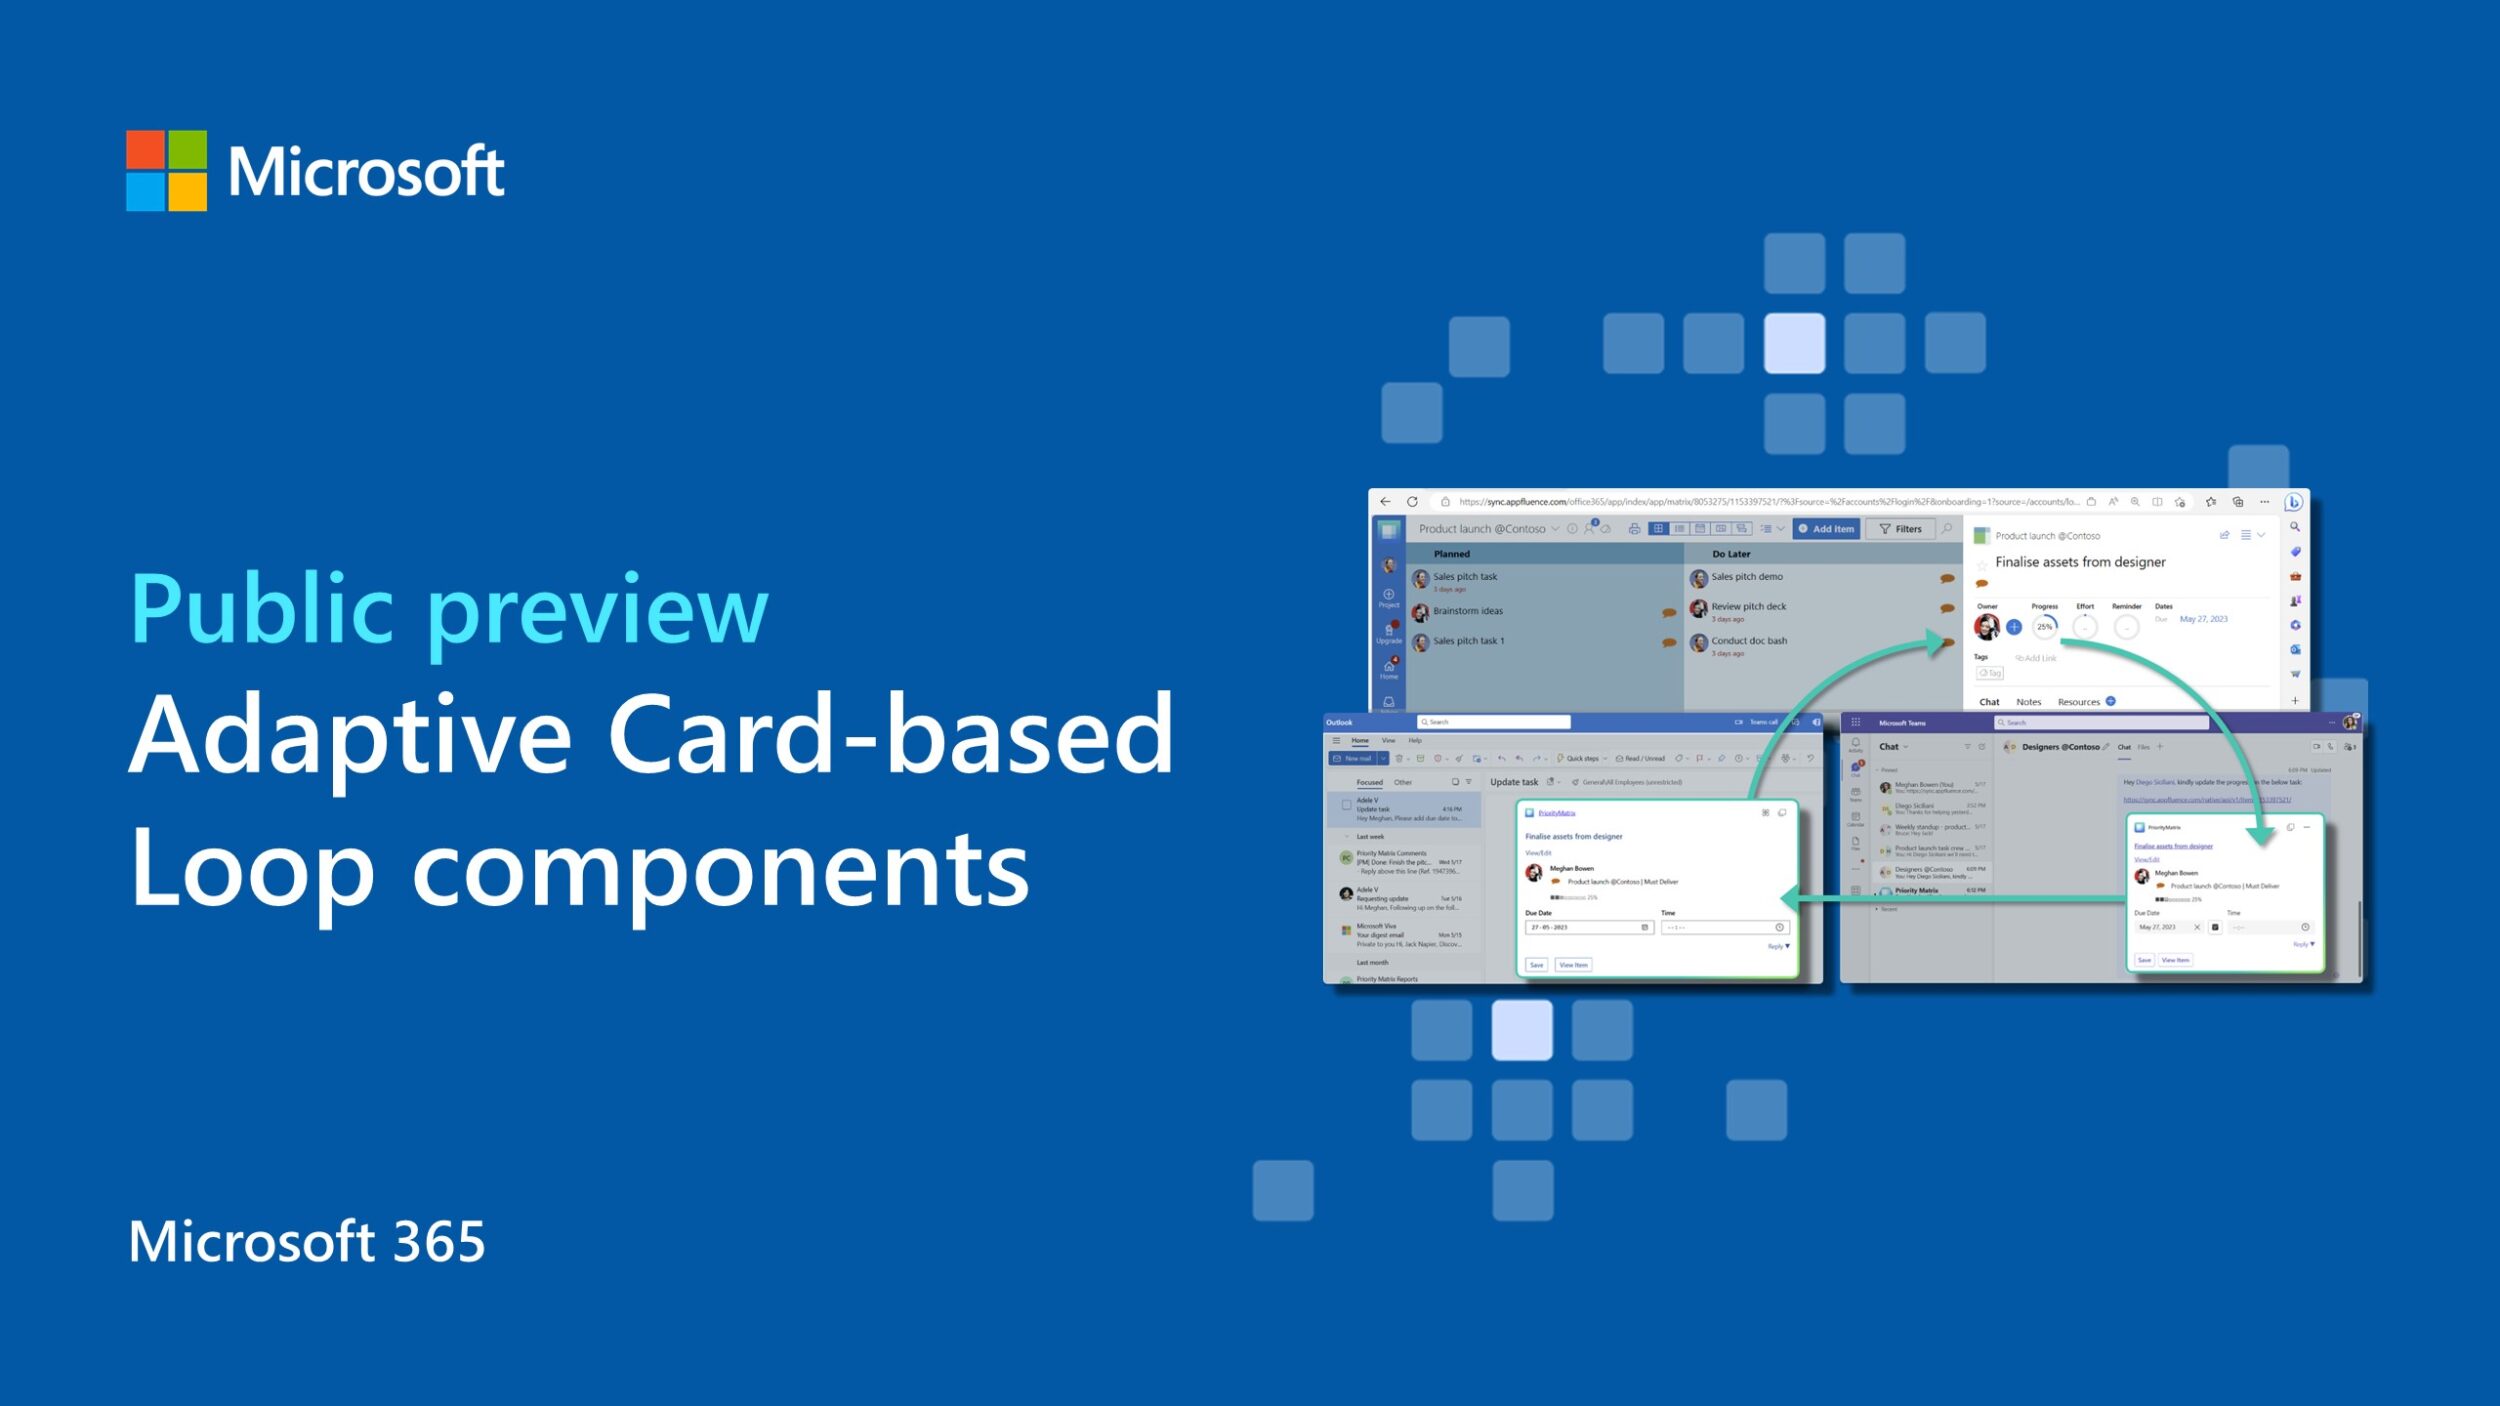 Adaptive Card-based Loop components are now in preview